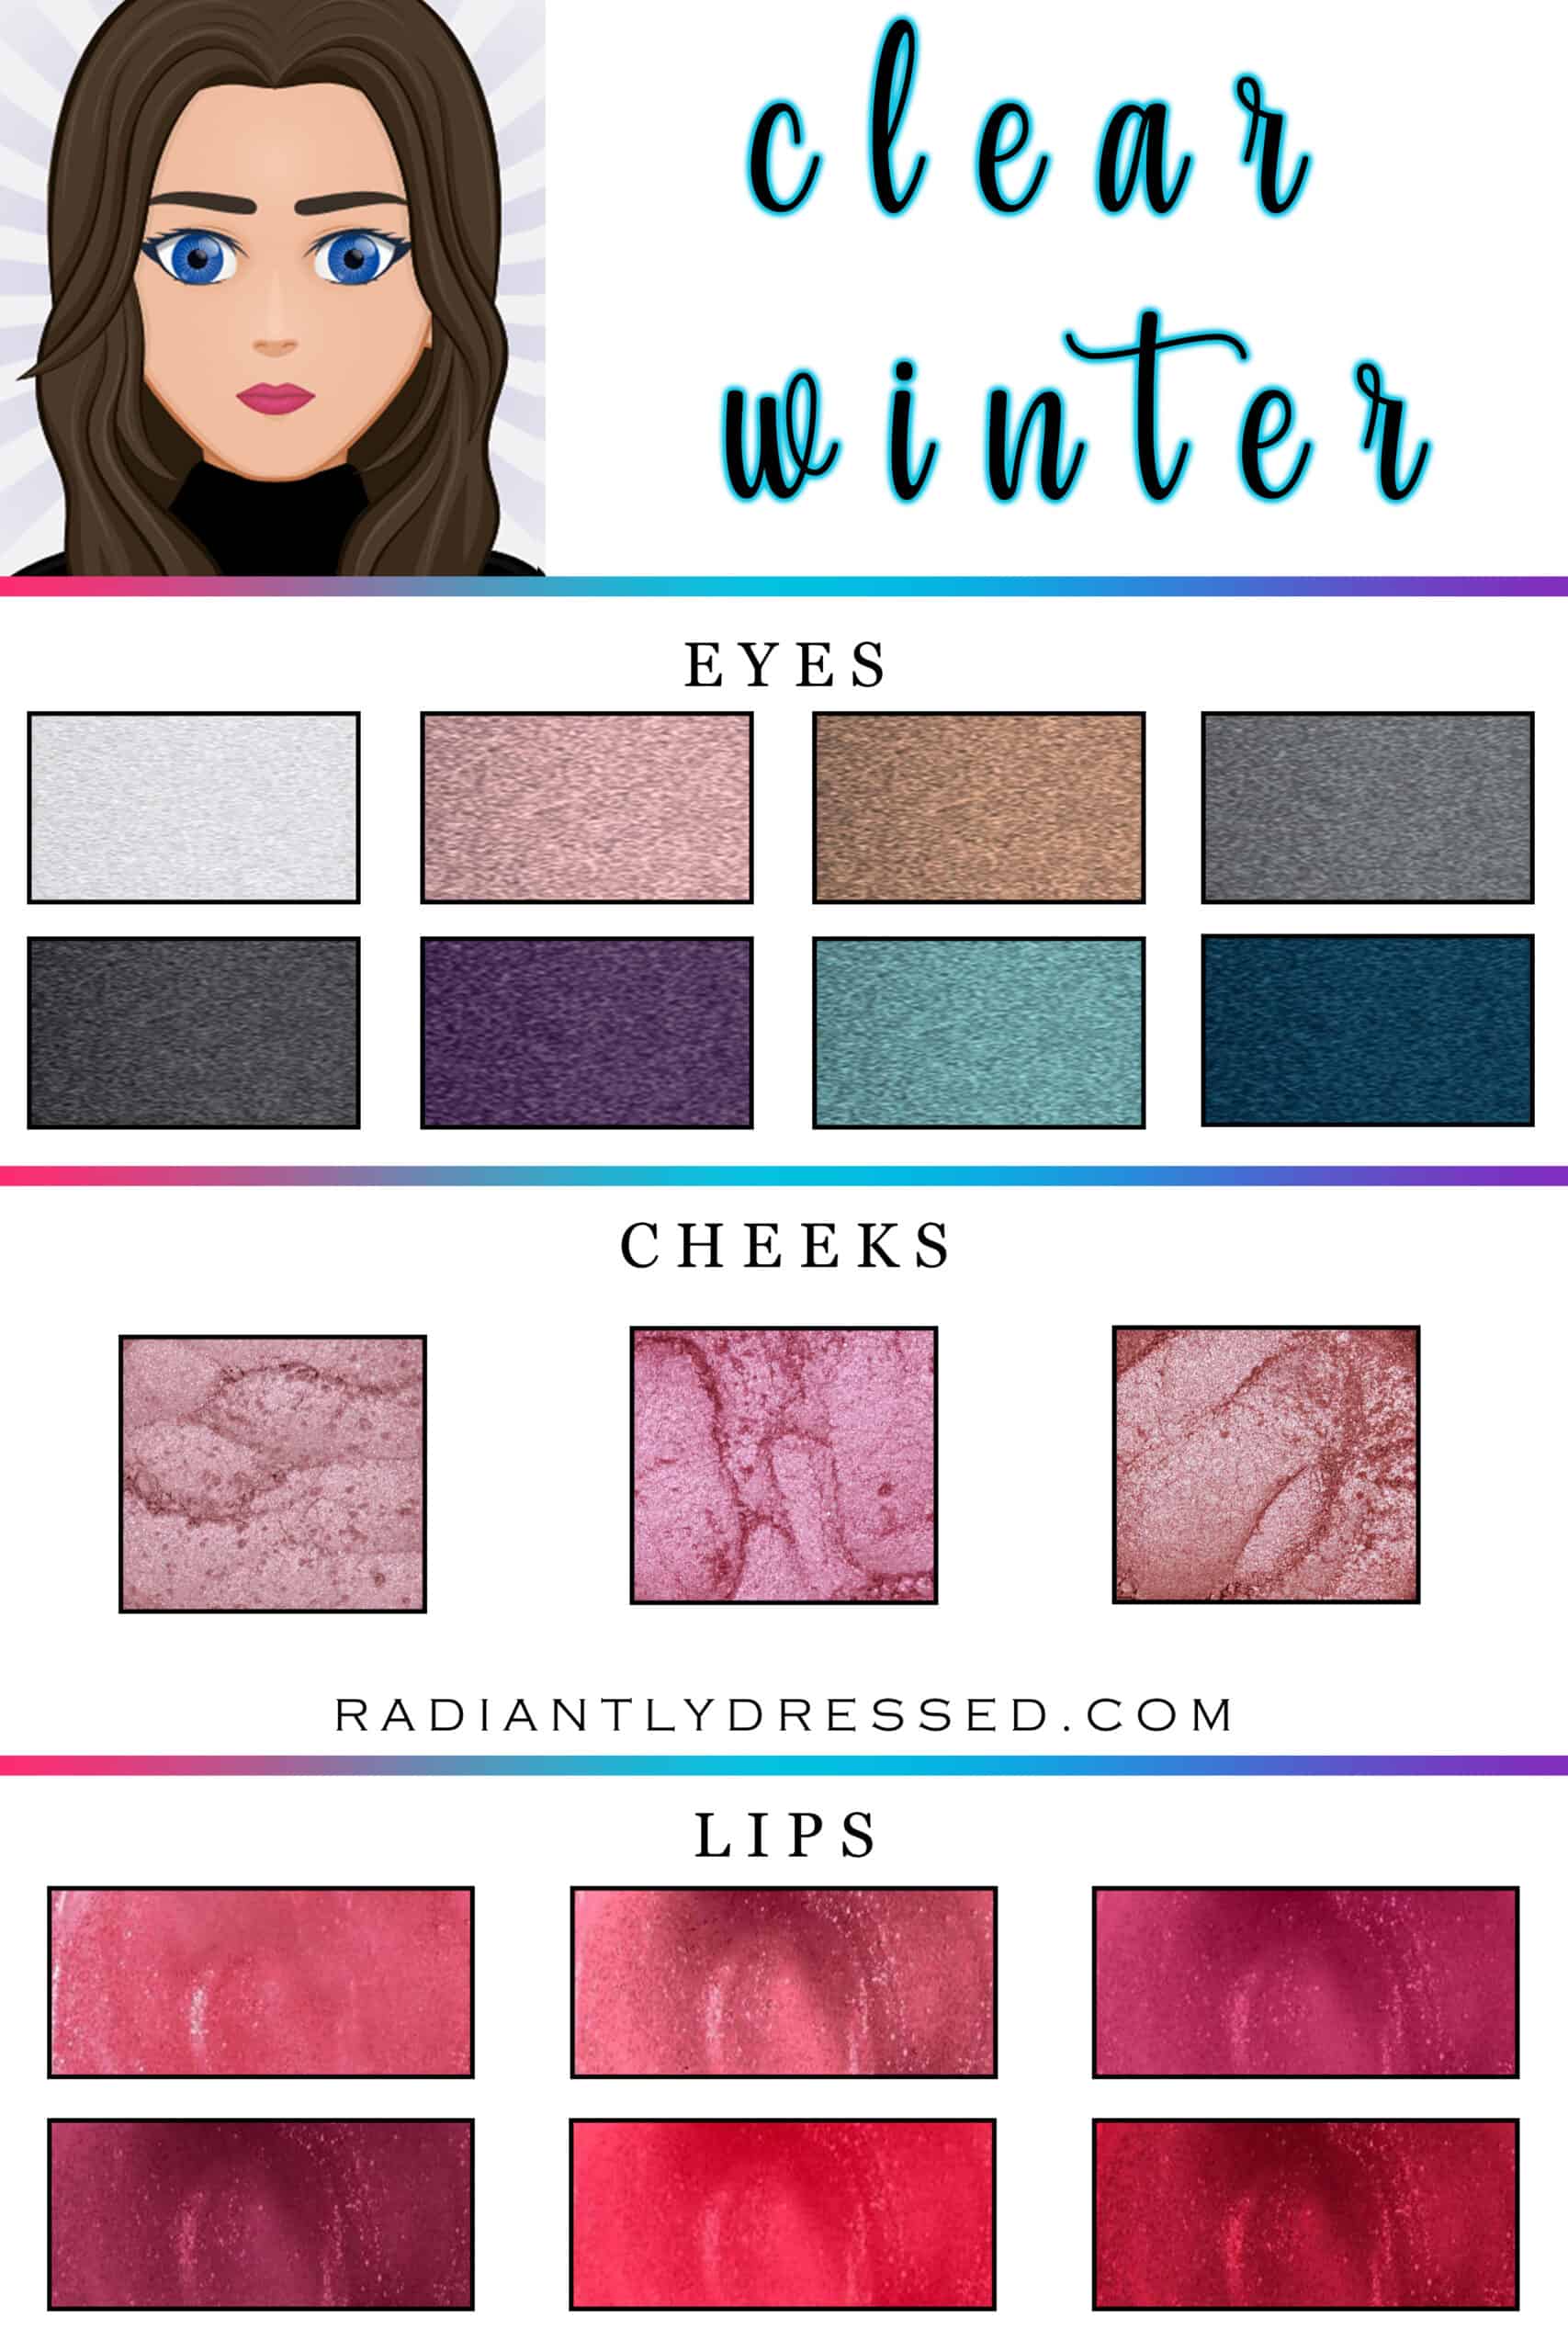 The best makeup for clear winter.